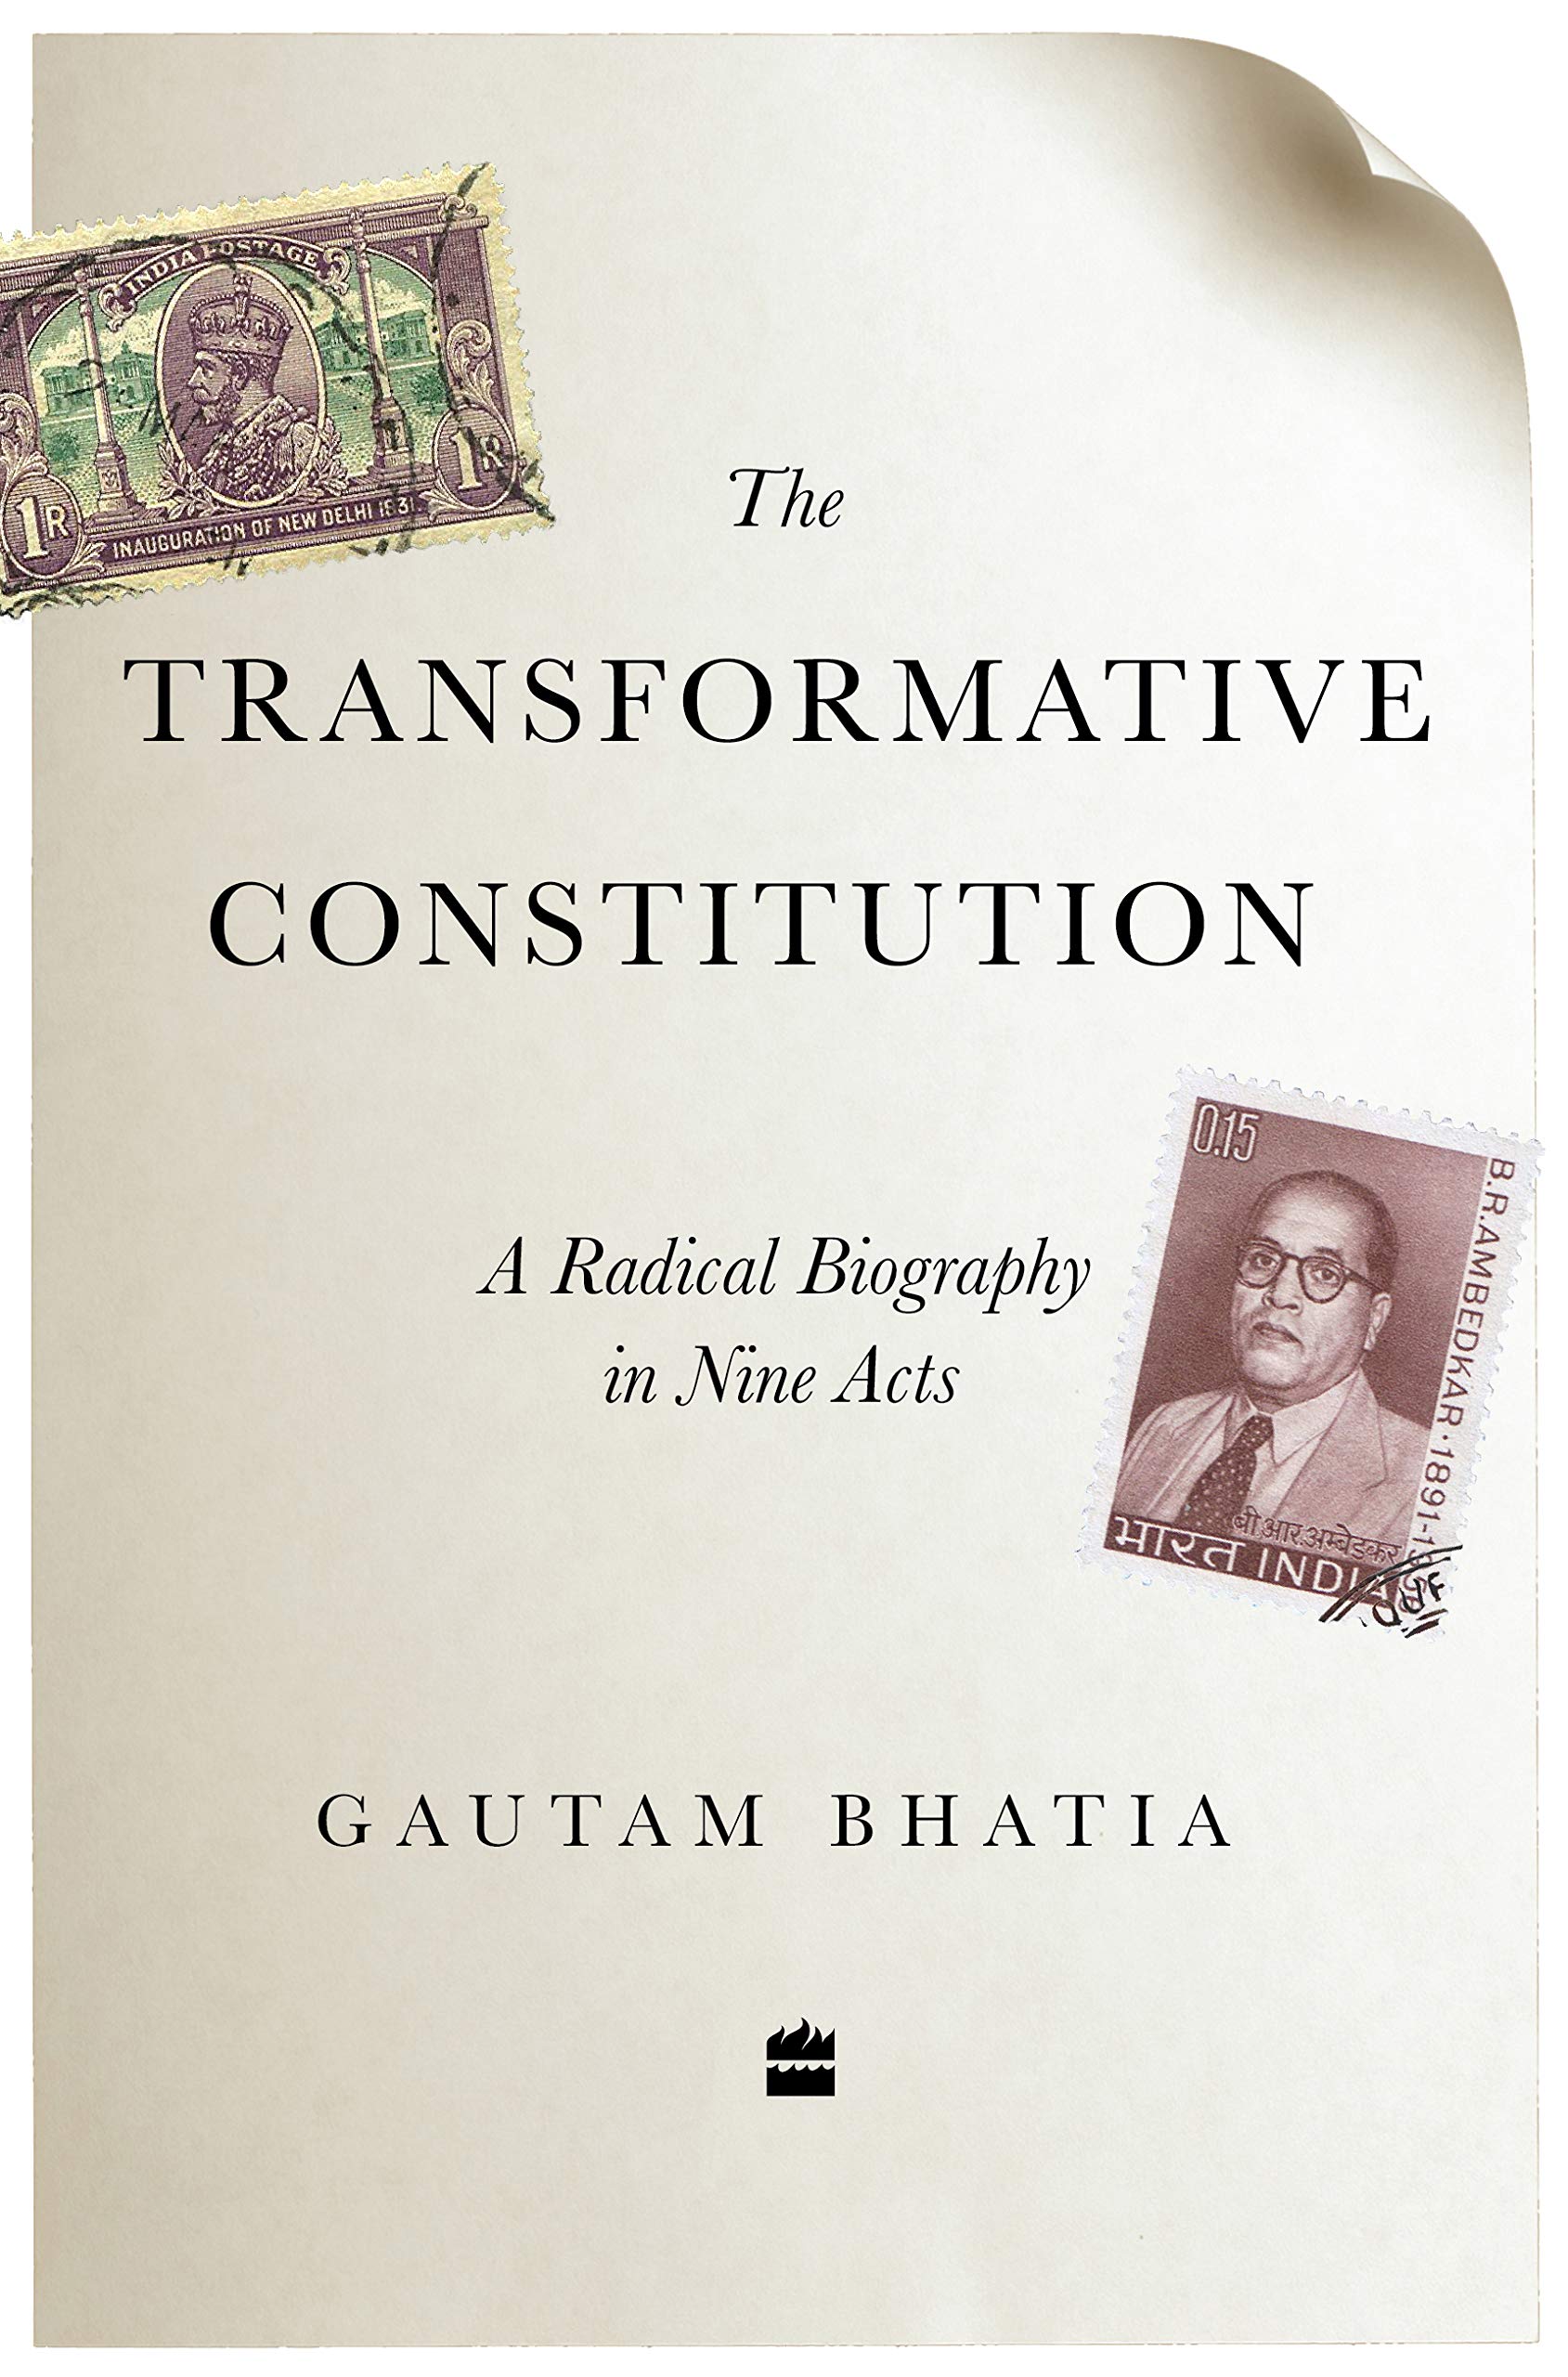 The Transformative Constitution A Radical Biography in Nine Acts by Gautam Bhatia (Book Review)